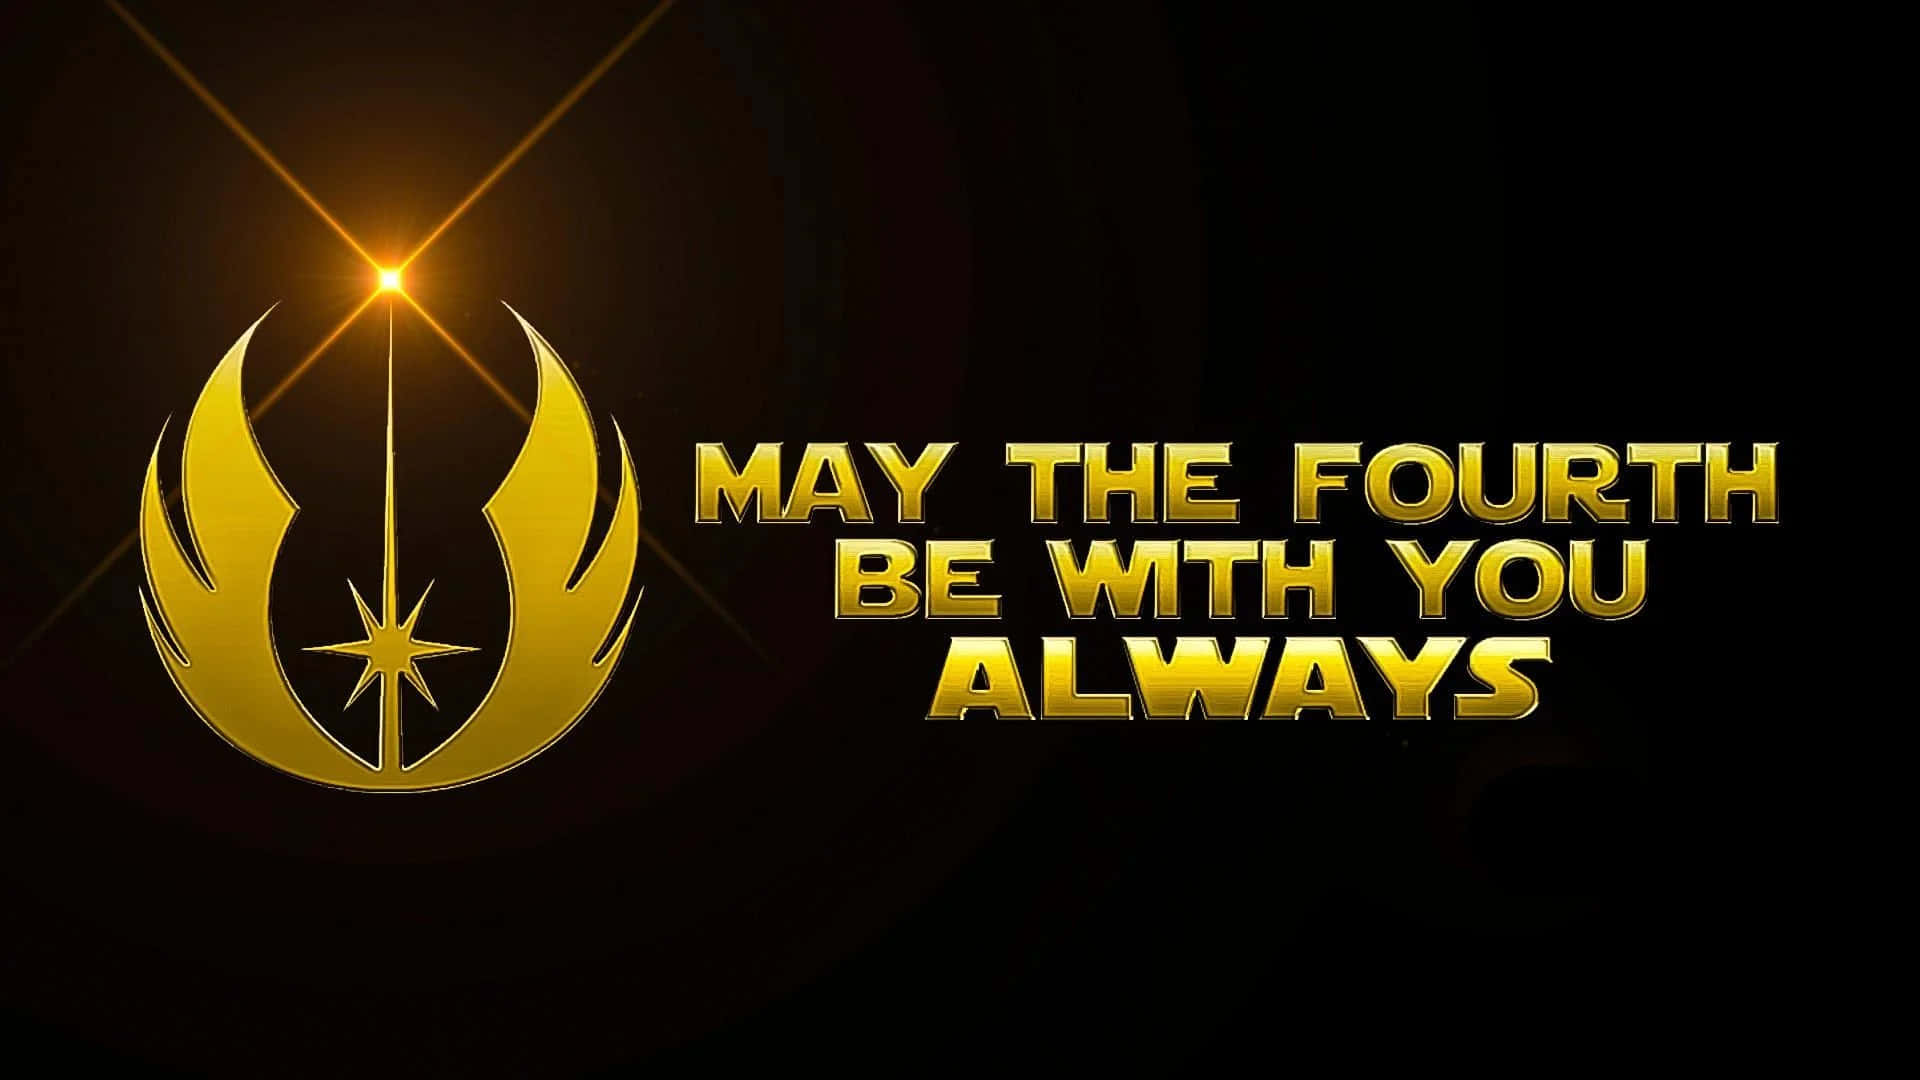 May The Force Be With You - Star Wars Universe Illustration Background